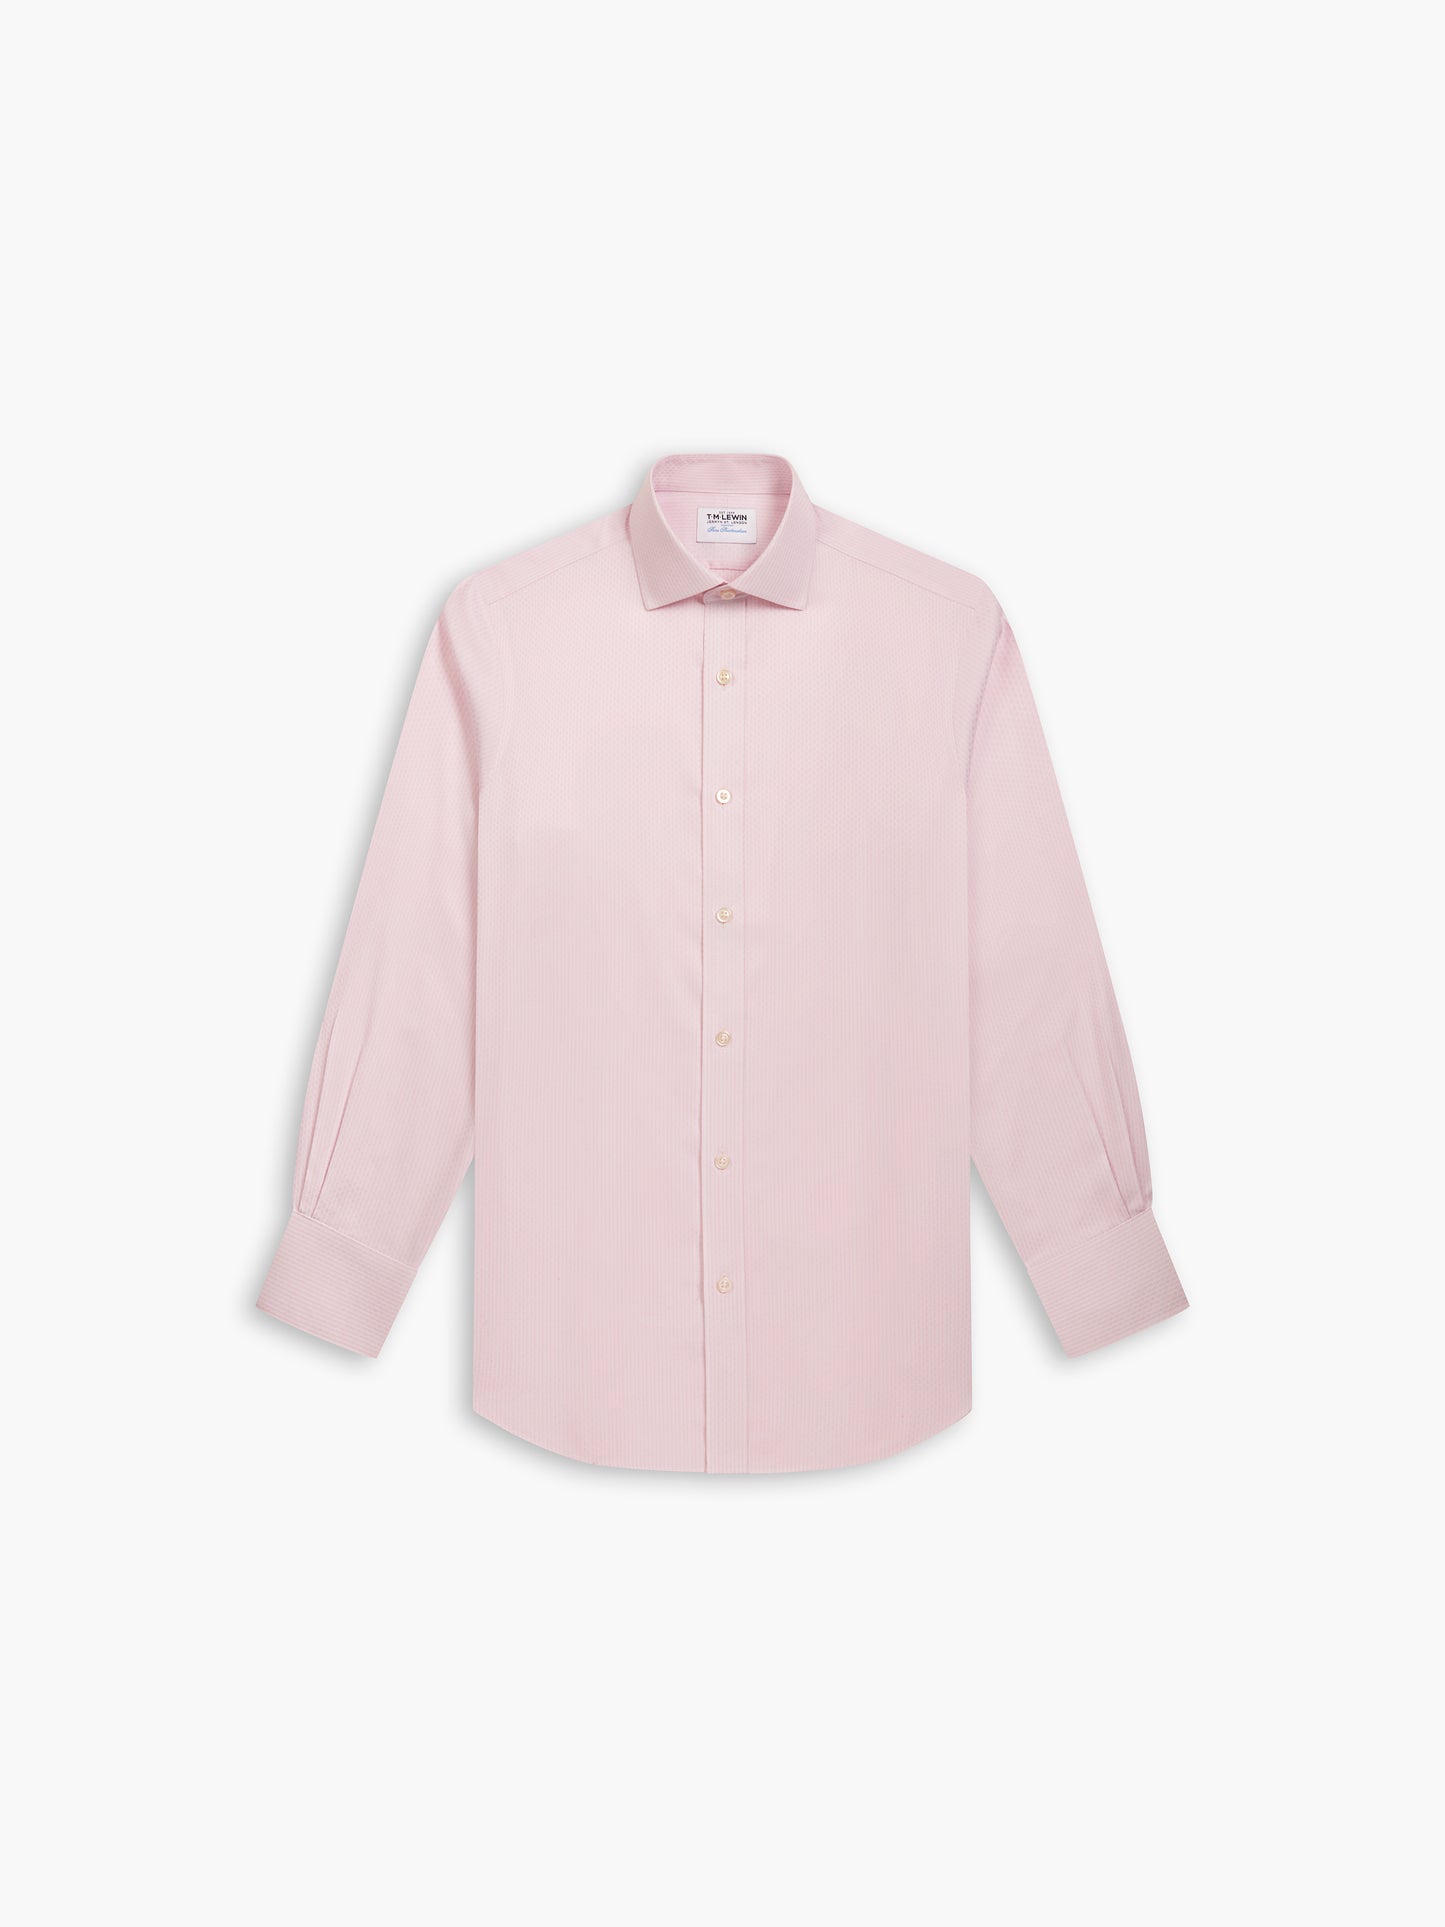 Image 2 of Non-Iron Pink Brick Geometric Dobby Super Fitted Single Cuff Classic Collar Shirt